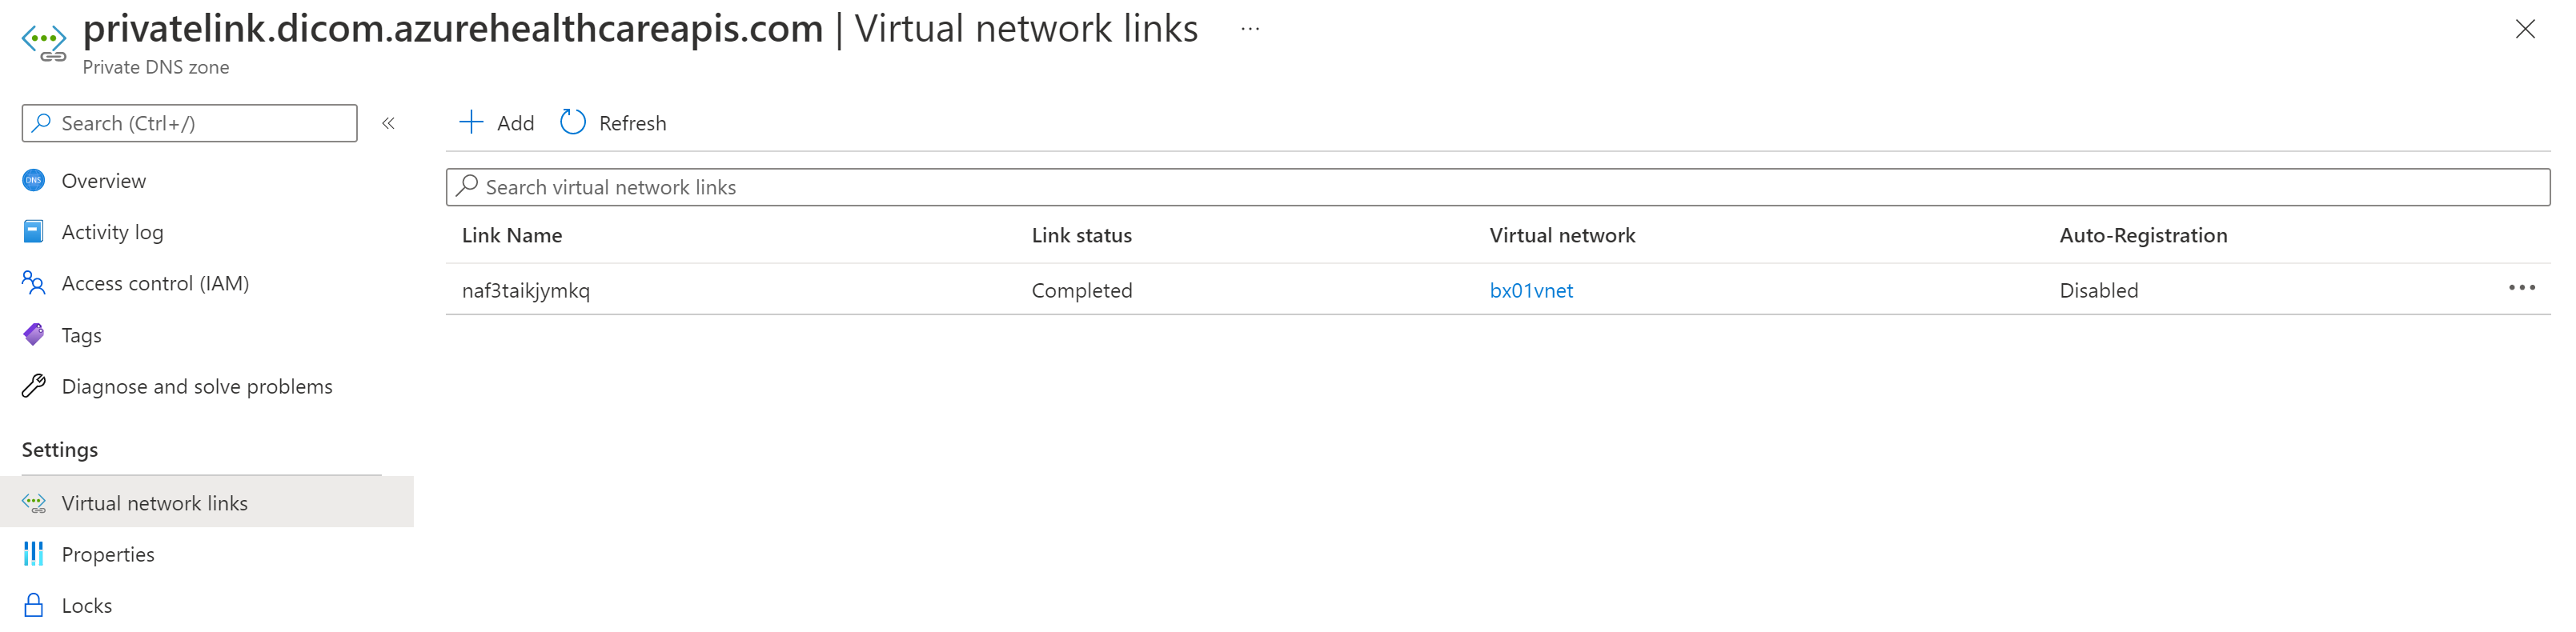 Screenshot showing image of Private Link virtual network Link DICOM.